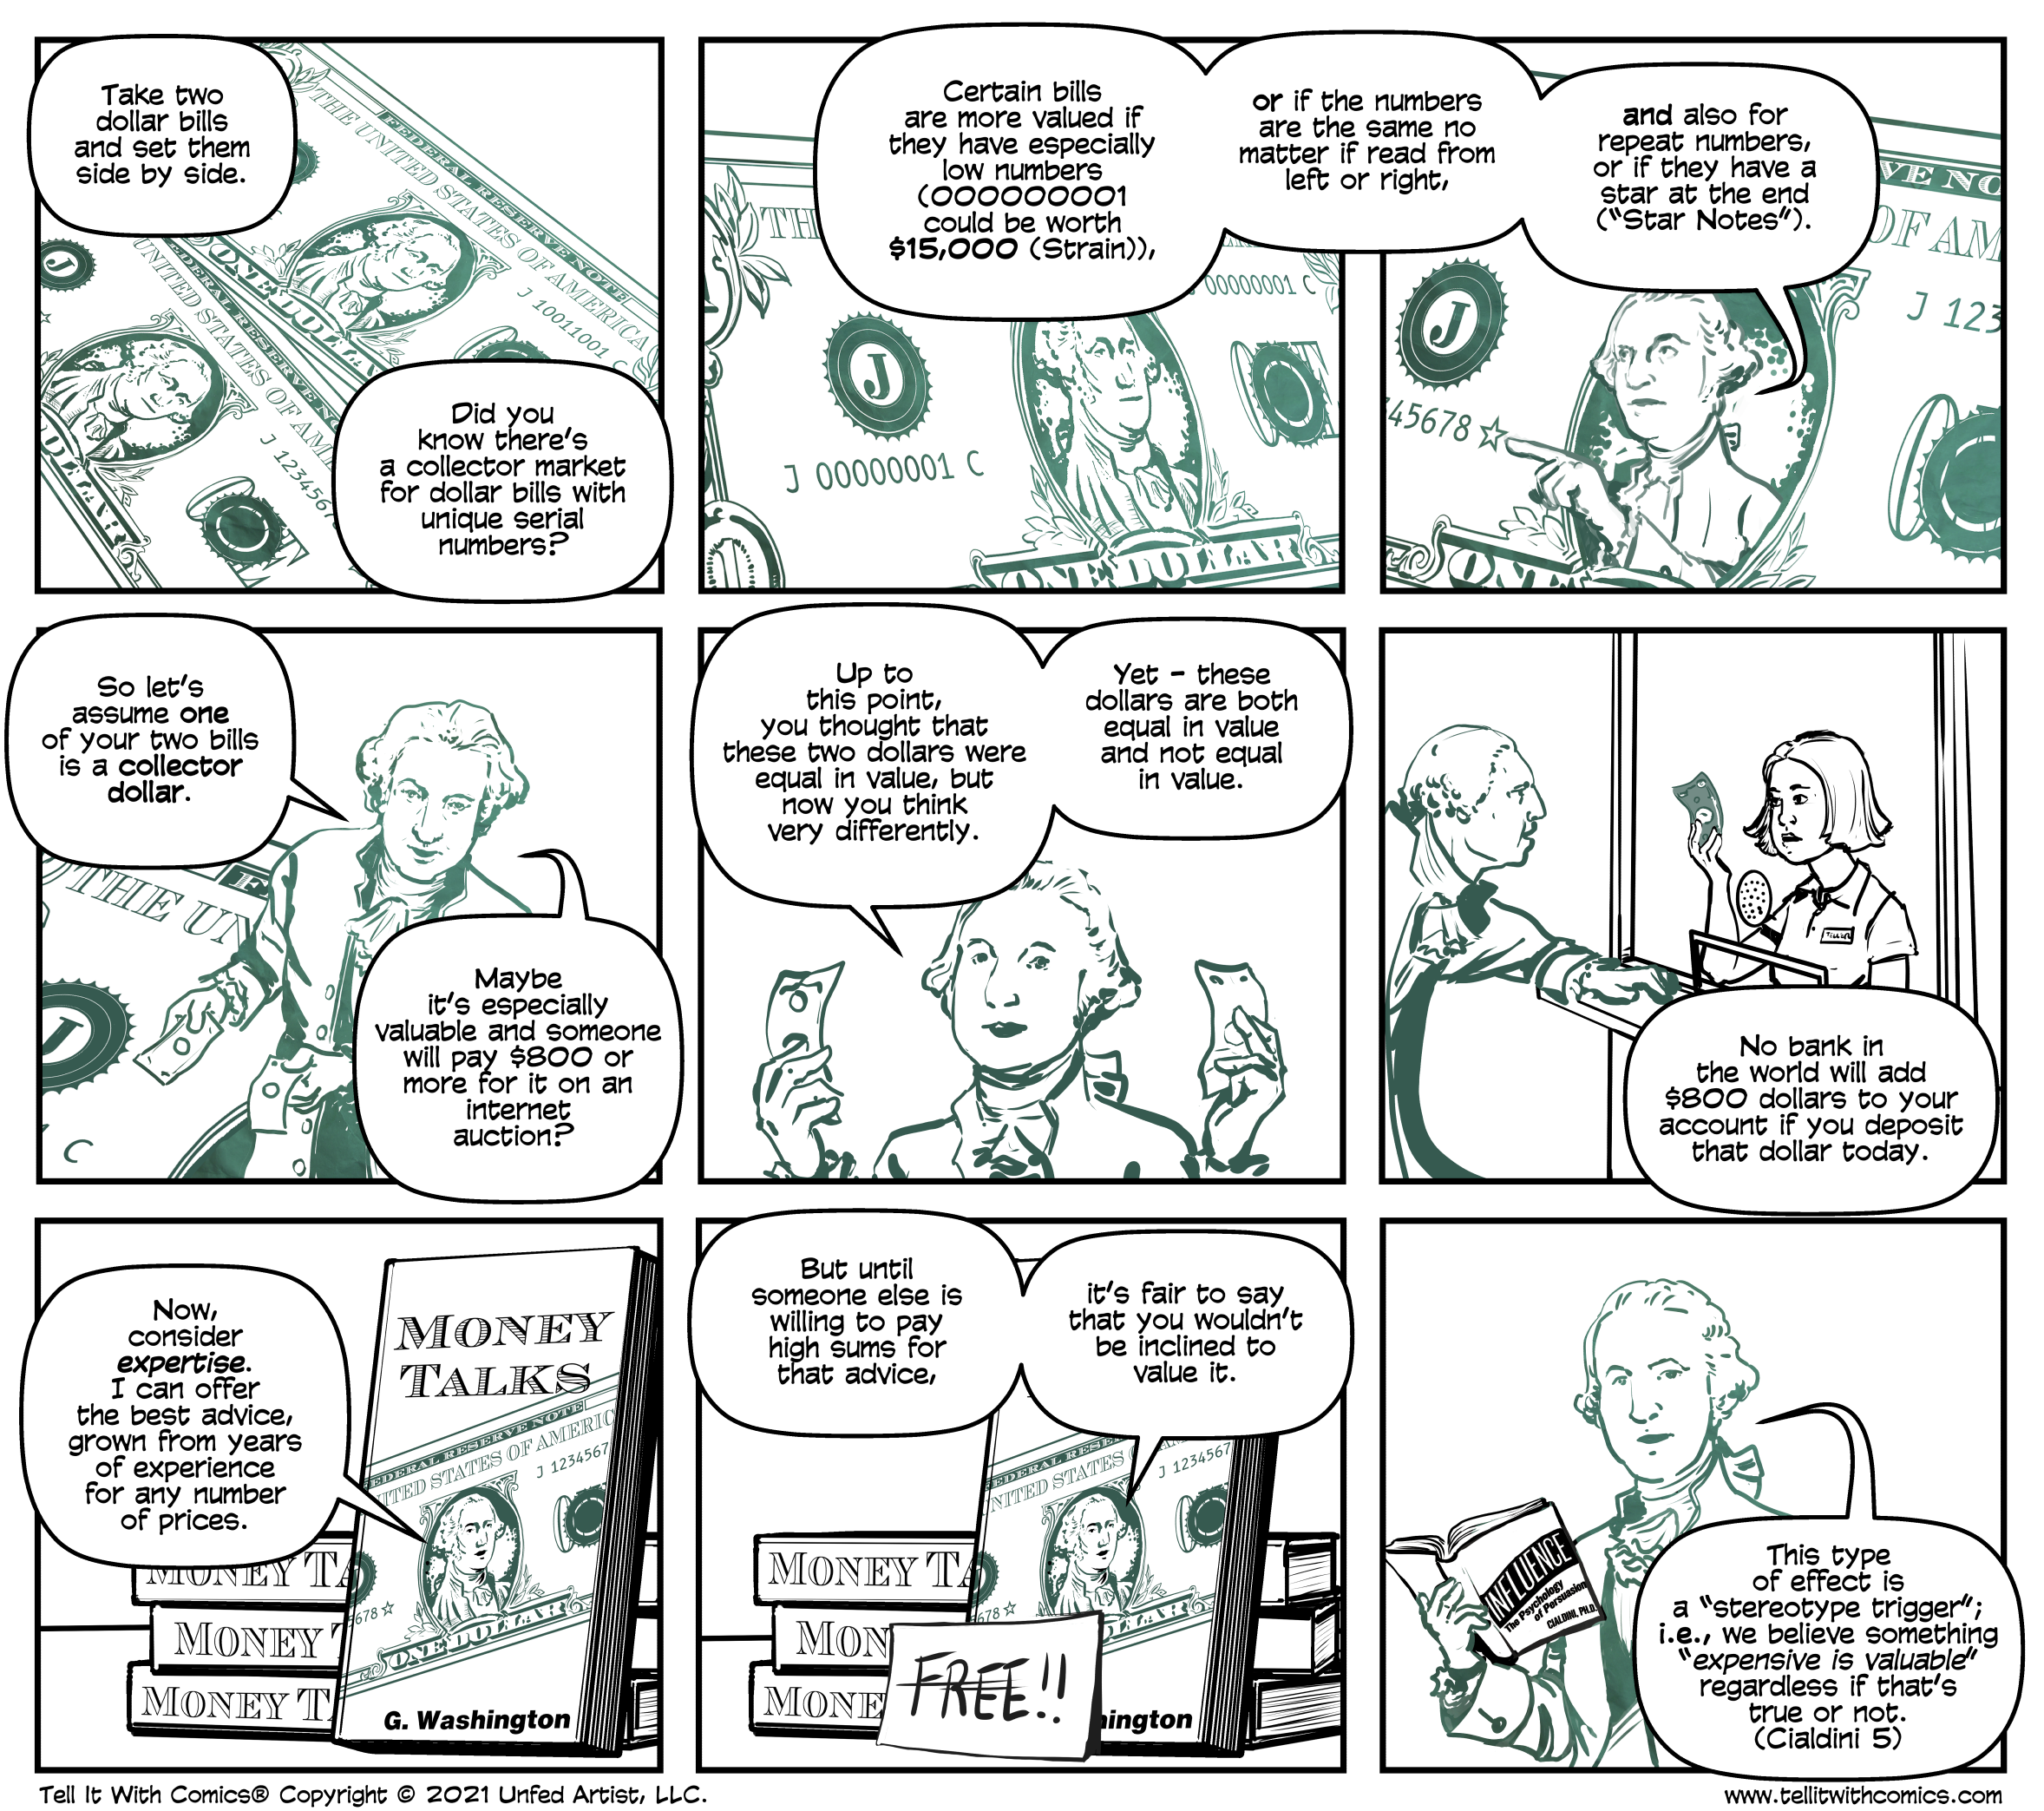 Thumbnail of a multipanel, green and black comic showing images of a dollar bill and George Washington.